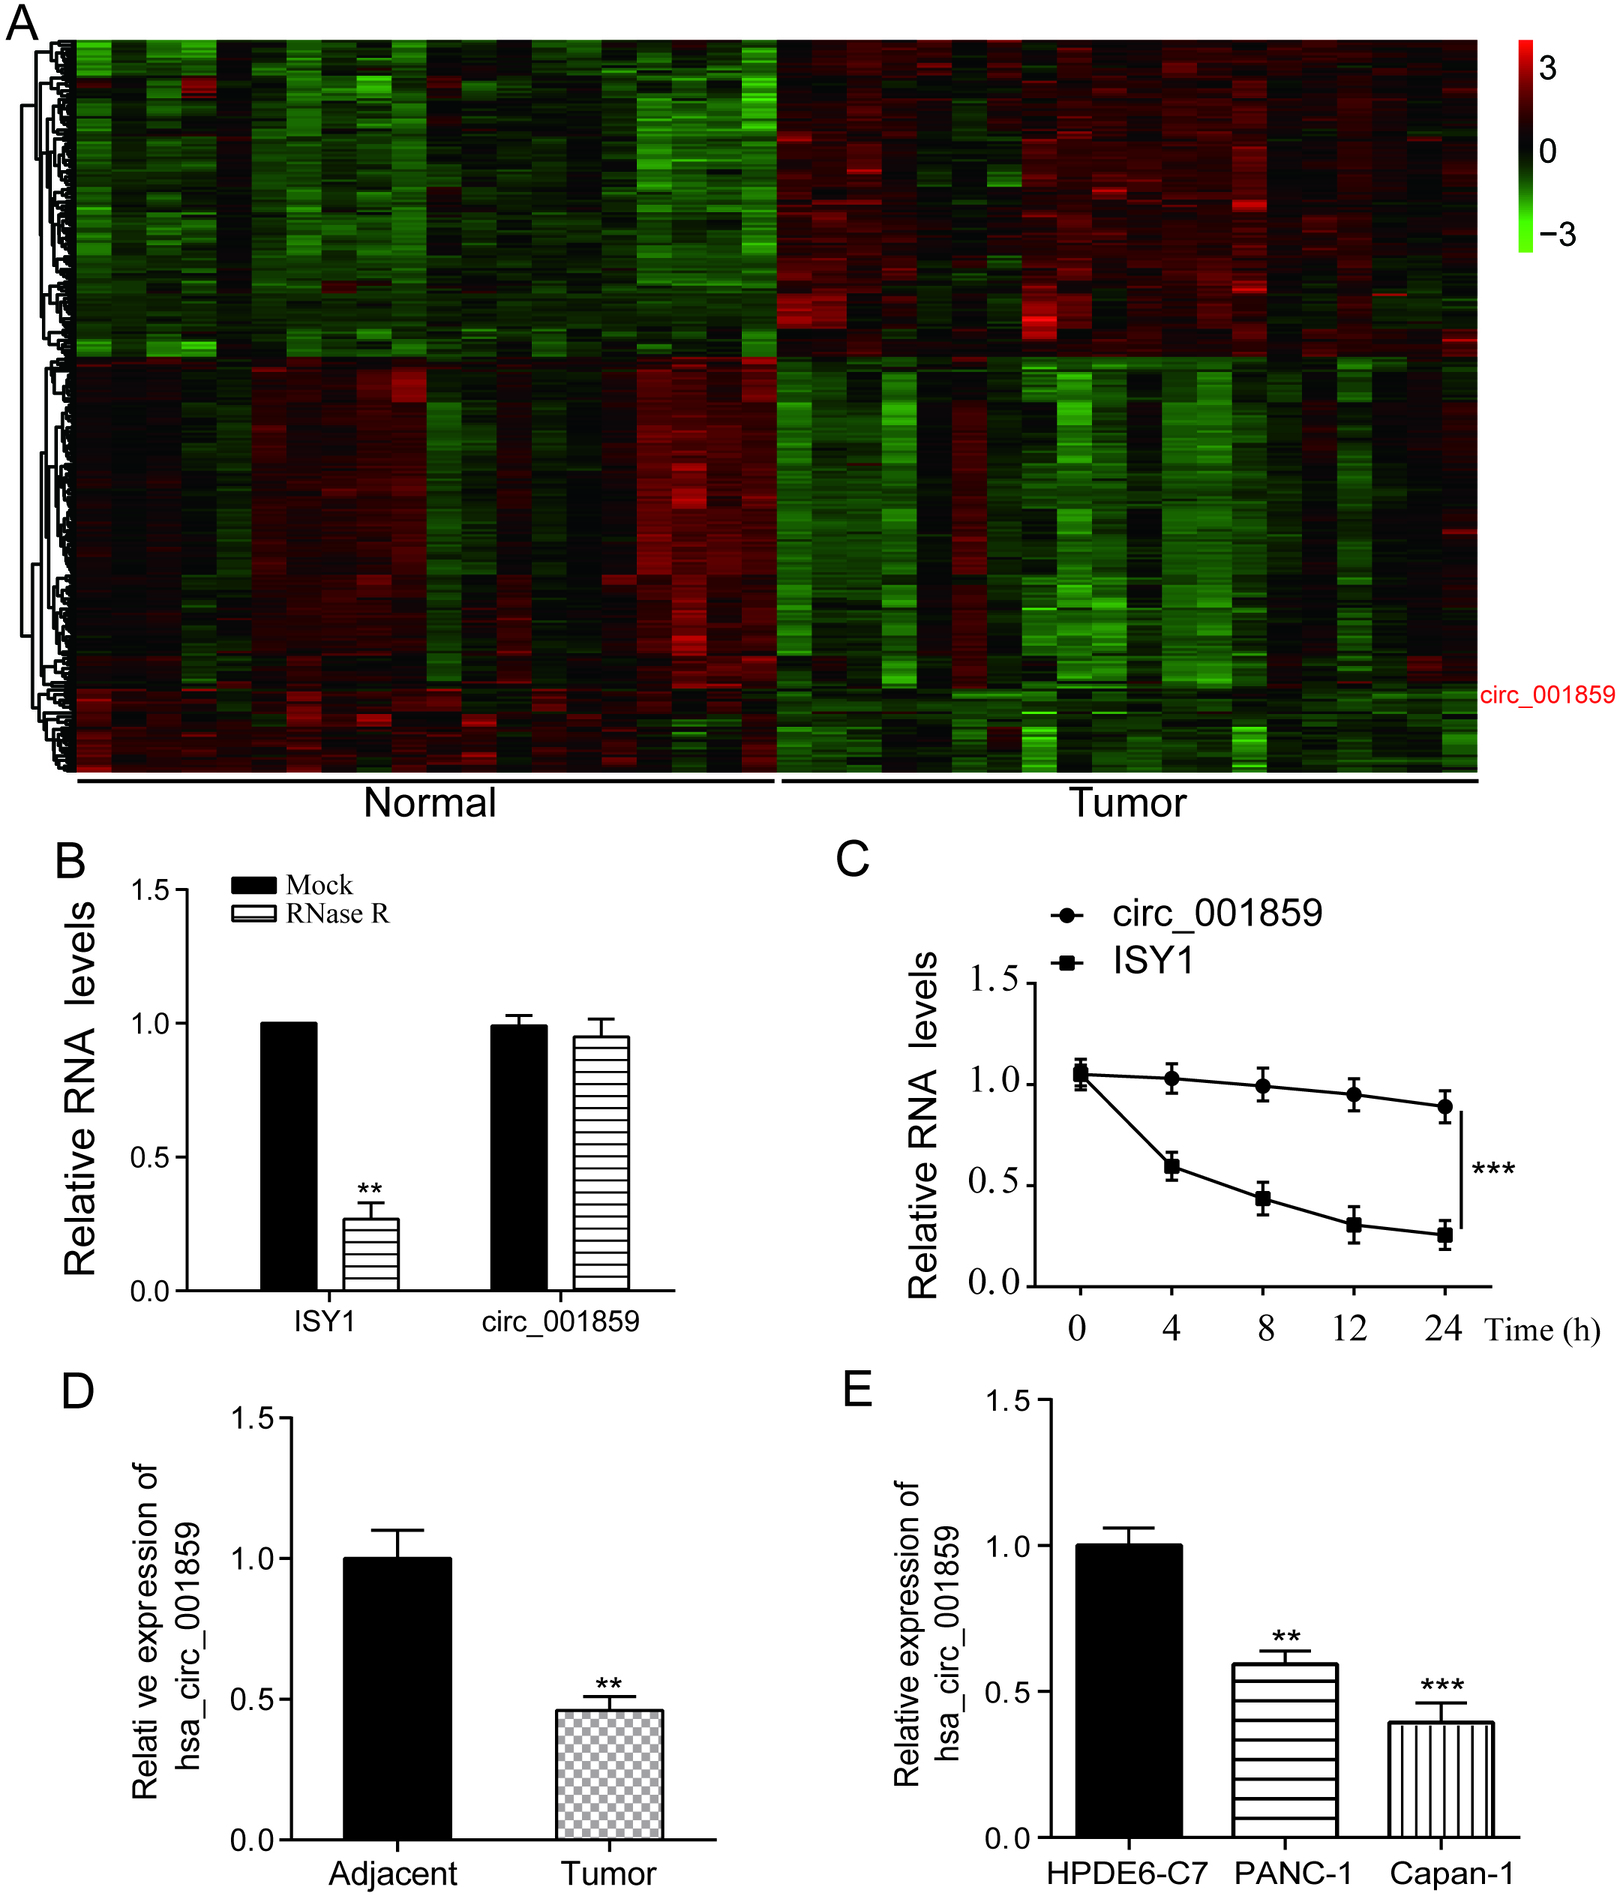 Circ_001859 was down-regulated in tumor tissues and cells. (A) GSE79634 revealed circ_001859 as a suppressed circRNA with a criterion of logFC > 2 and p< 0.05. (B) The expression of circ_001859 and ISY1 after RNase R treatment was detected by QRT-PCR. (C) The degradation of circ_001859 was verified by half-life detection. (D) Circ_001859 was lowly expressed in tumor tisseus. (E) Circ_001859 was lowly expressed in pancreatic cancer cell lines PANC-1 and Capan-1. P**< 0.01, P*⁣**< 0.001 indicated statistical significance.